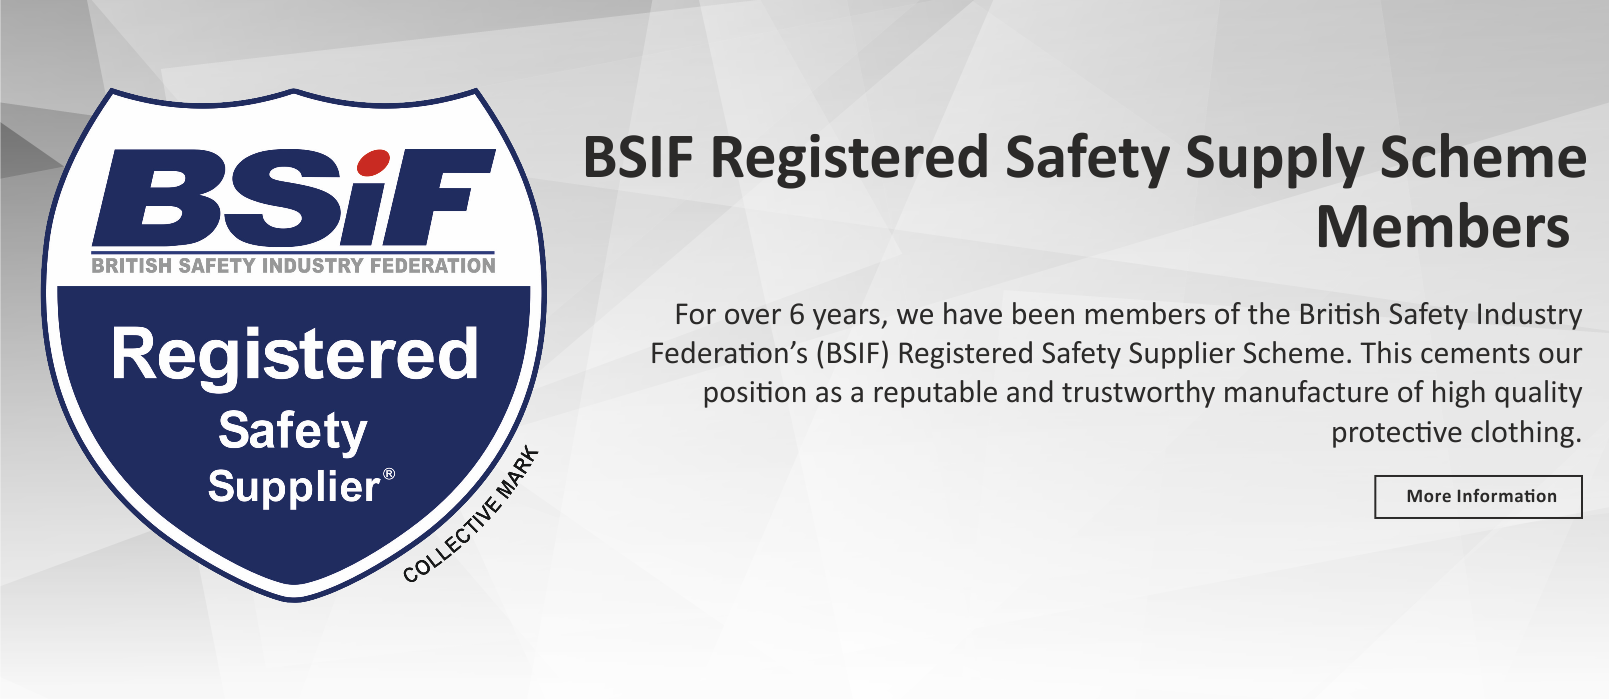 BSIF Registered Safety Supply Scheme Members